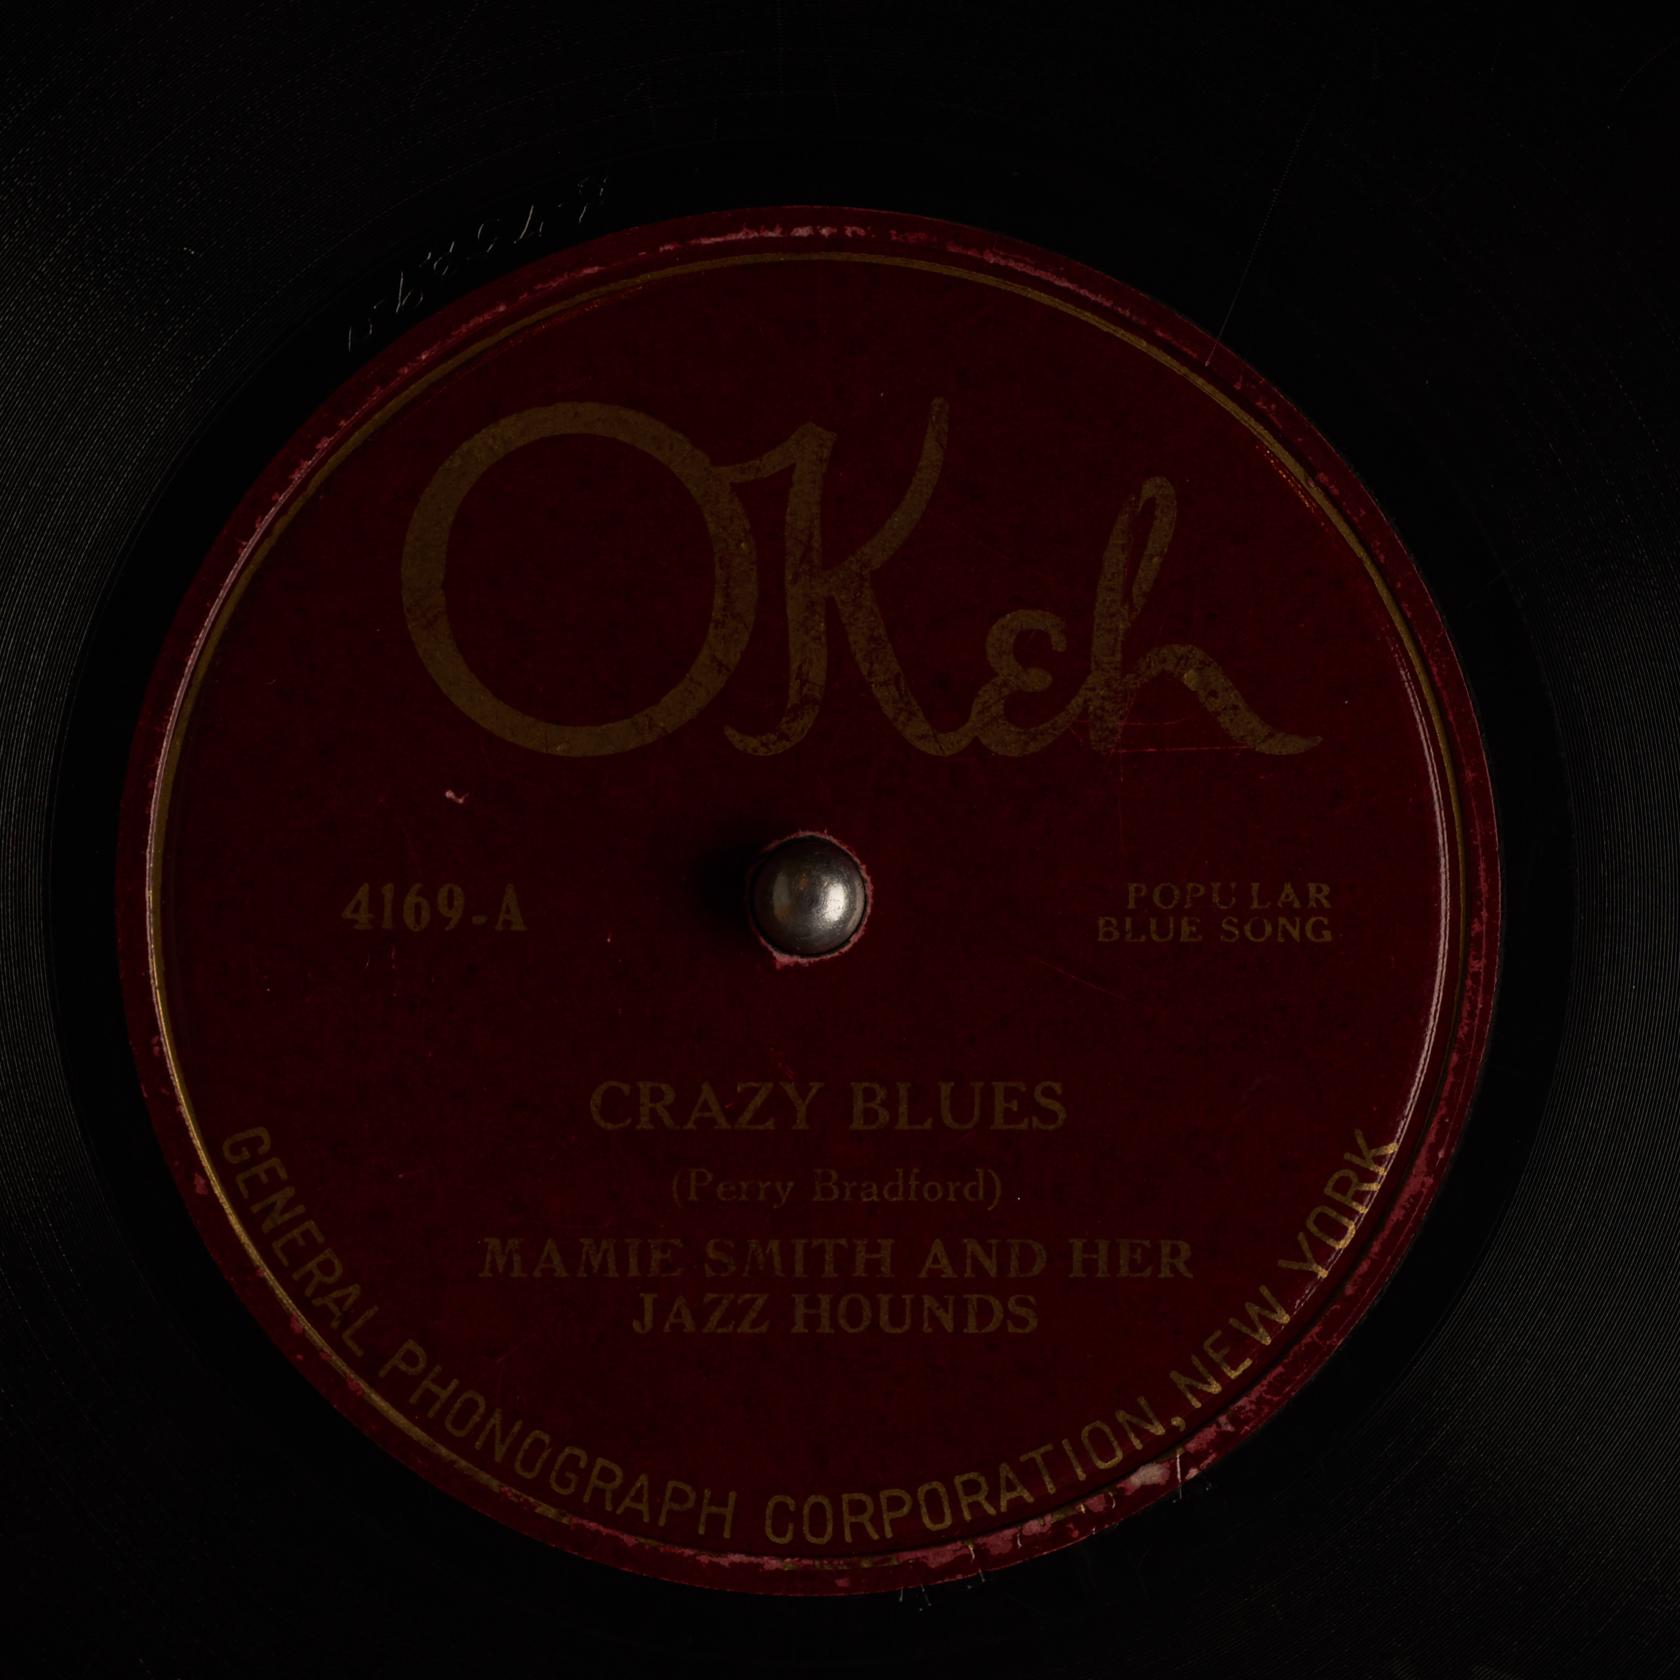 A scan of the label of the first issue of Crazy Blues by Mamie Smith on Okeh Records